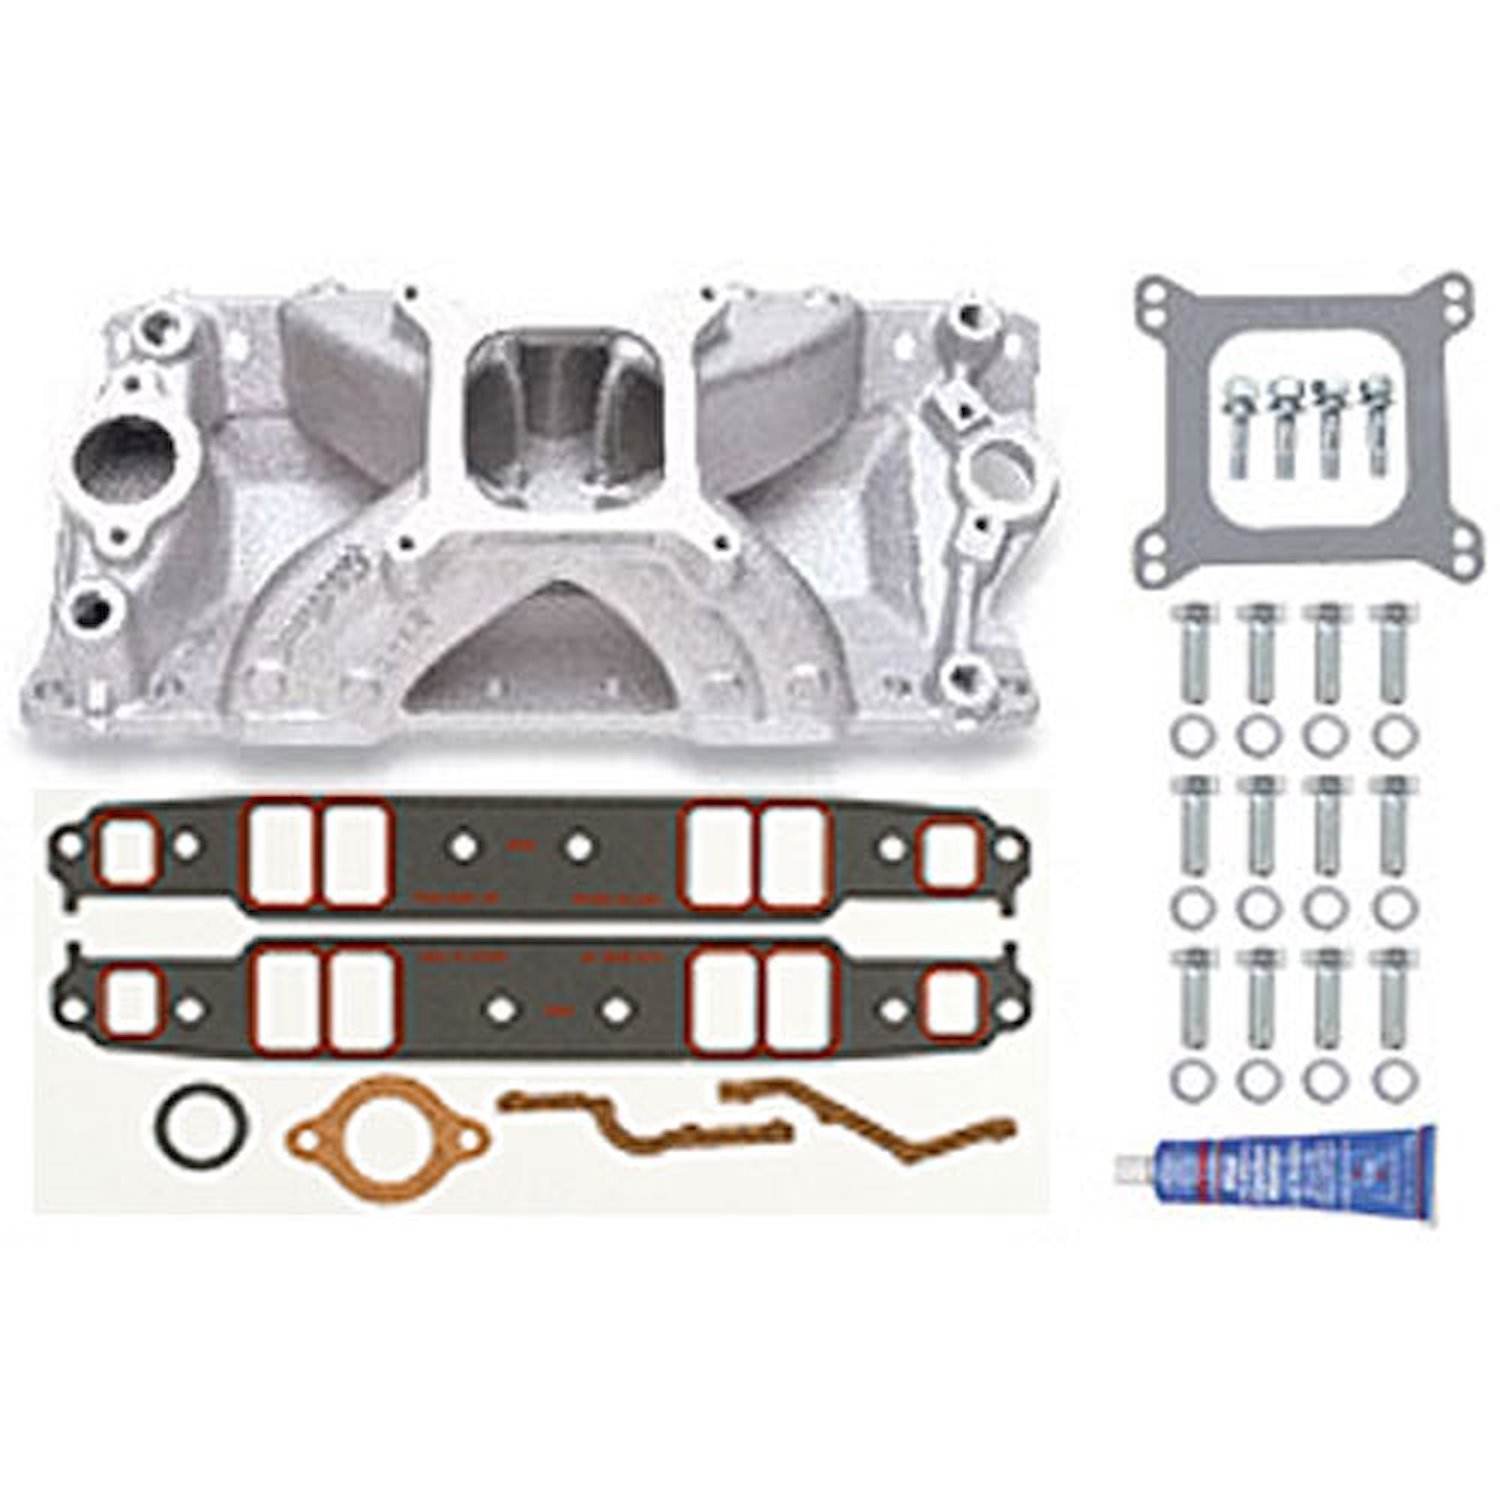 Super Victor Intake Manifold for Small Block Chevy with Installation Kit